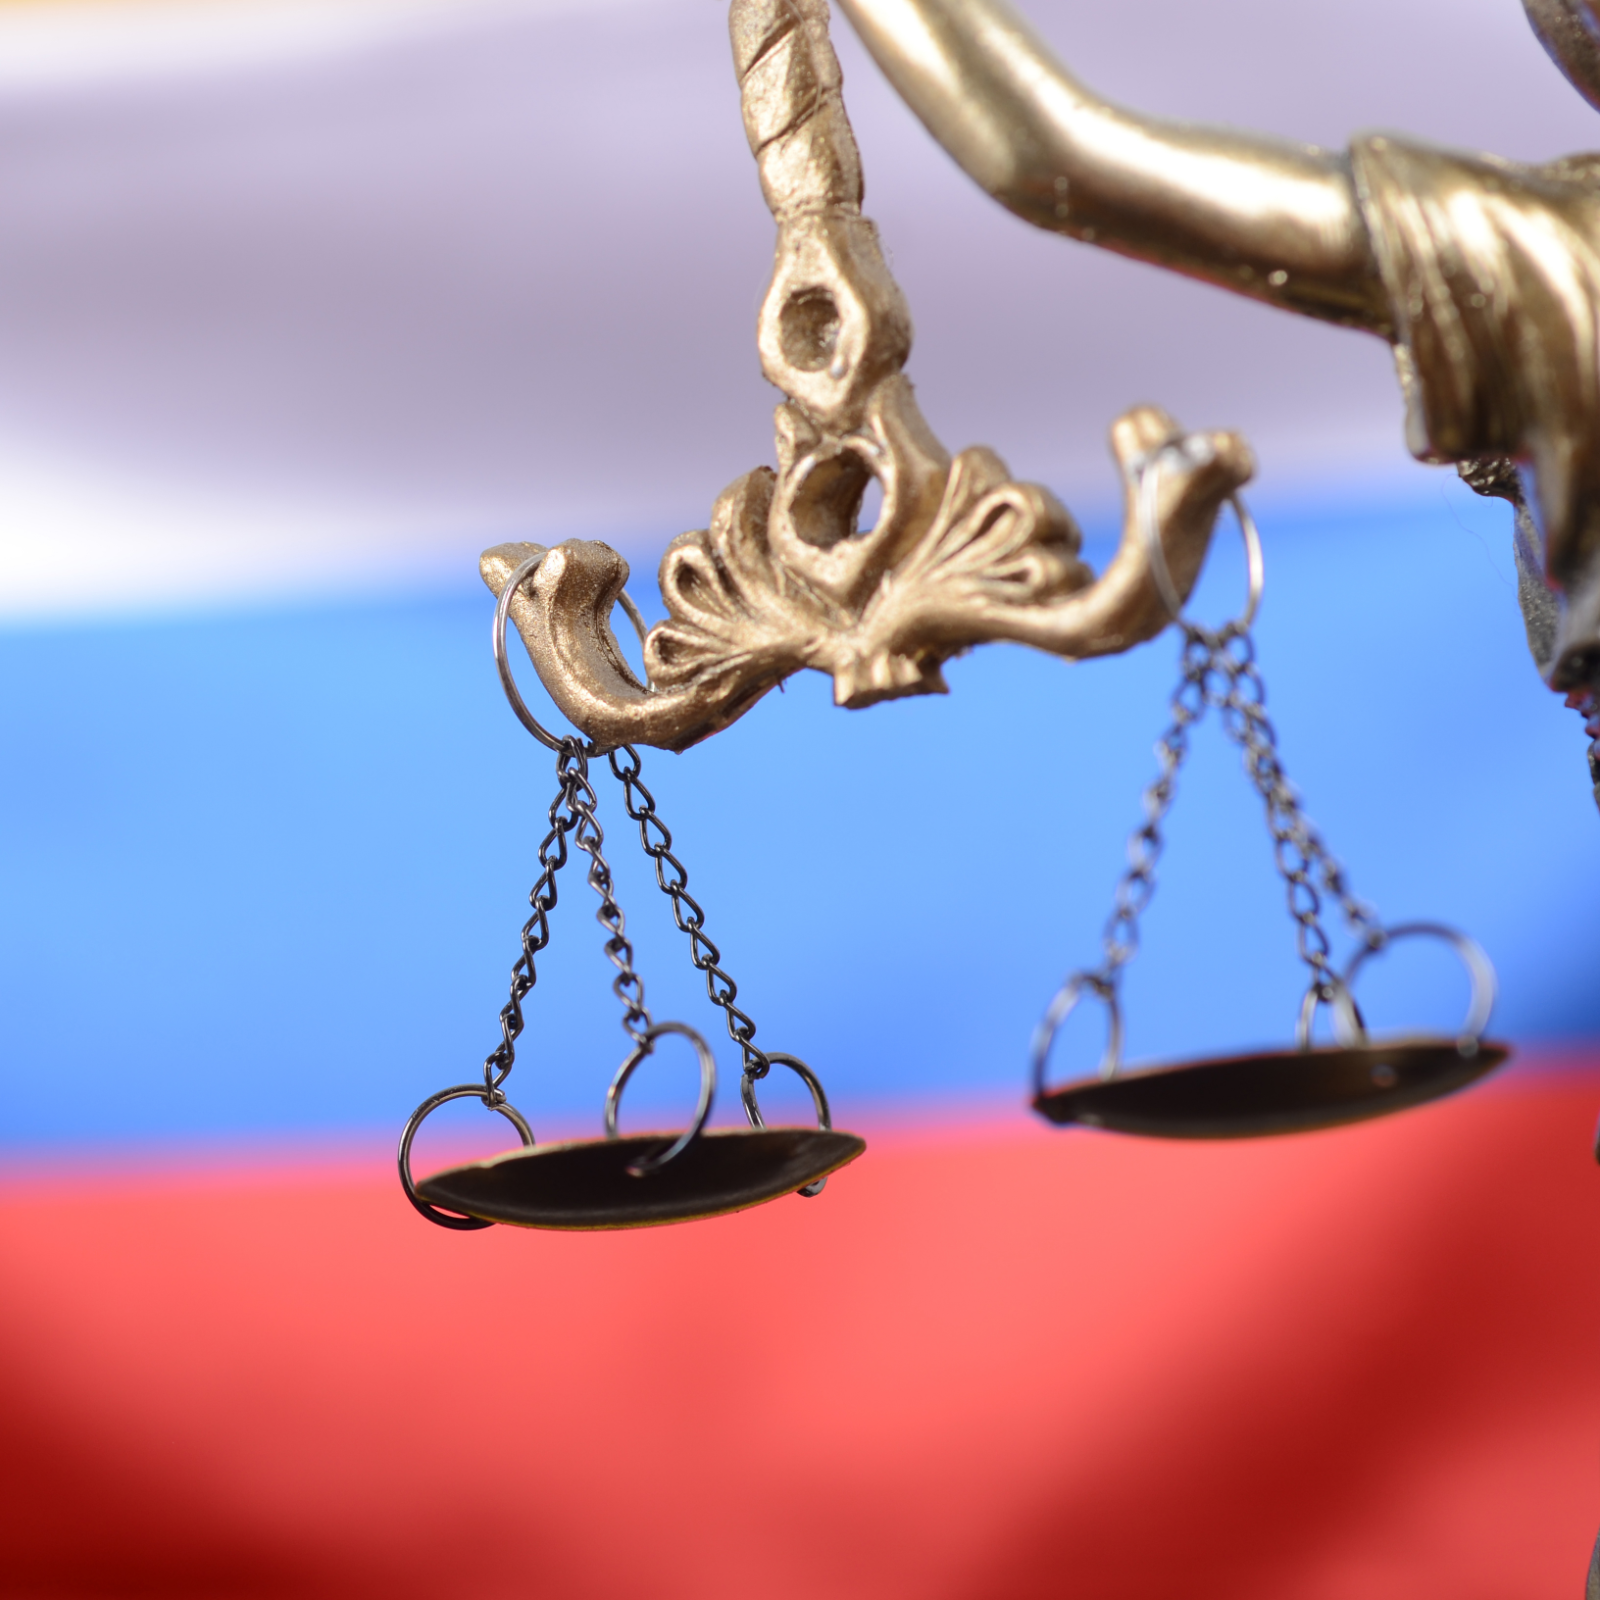 Russian Court Cancels Decision to Block Bitcoin Website